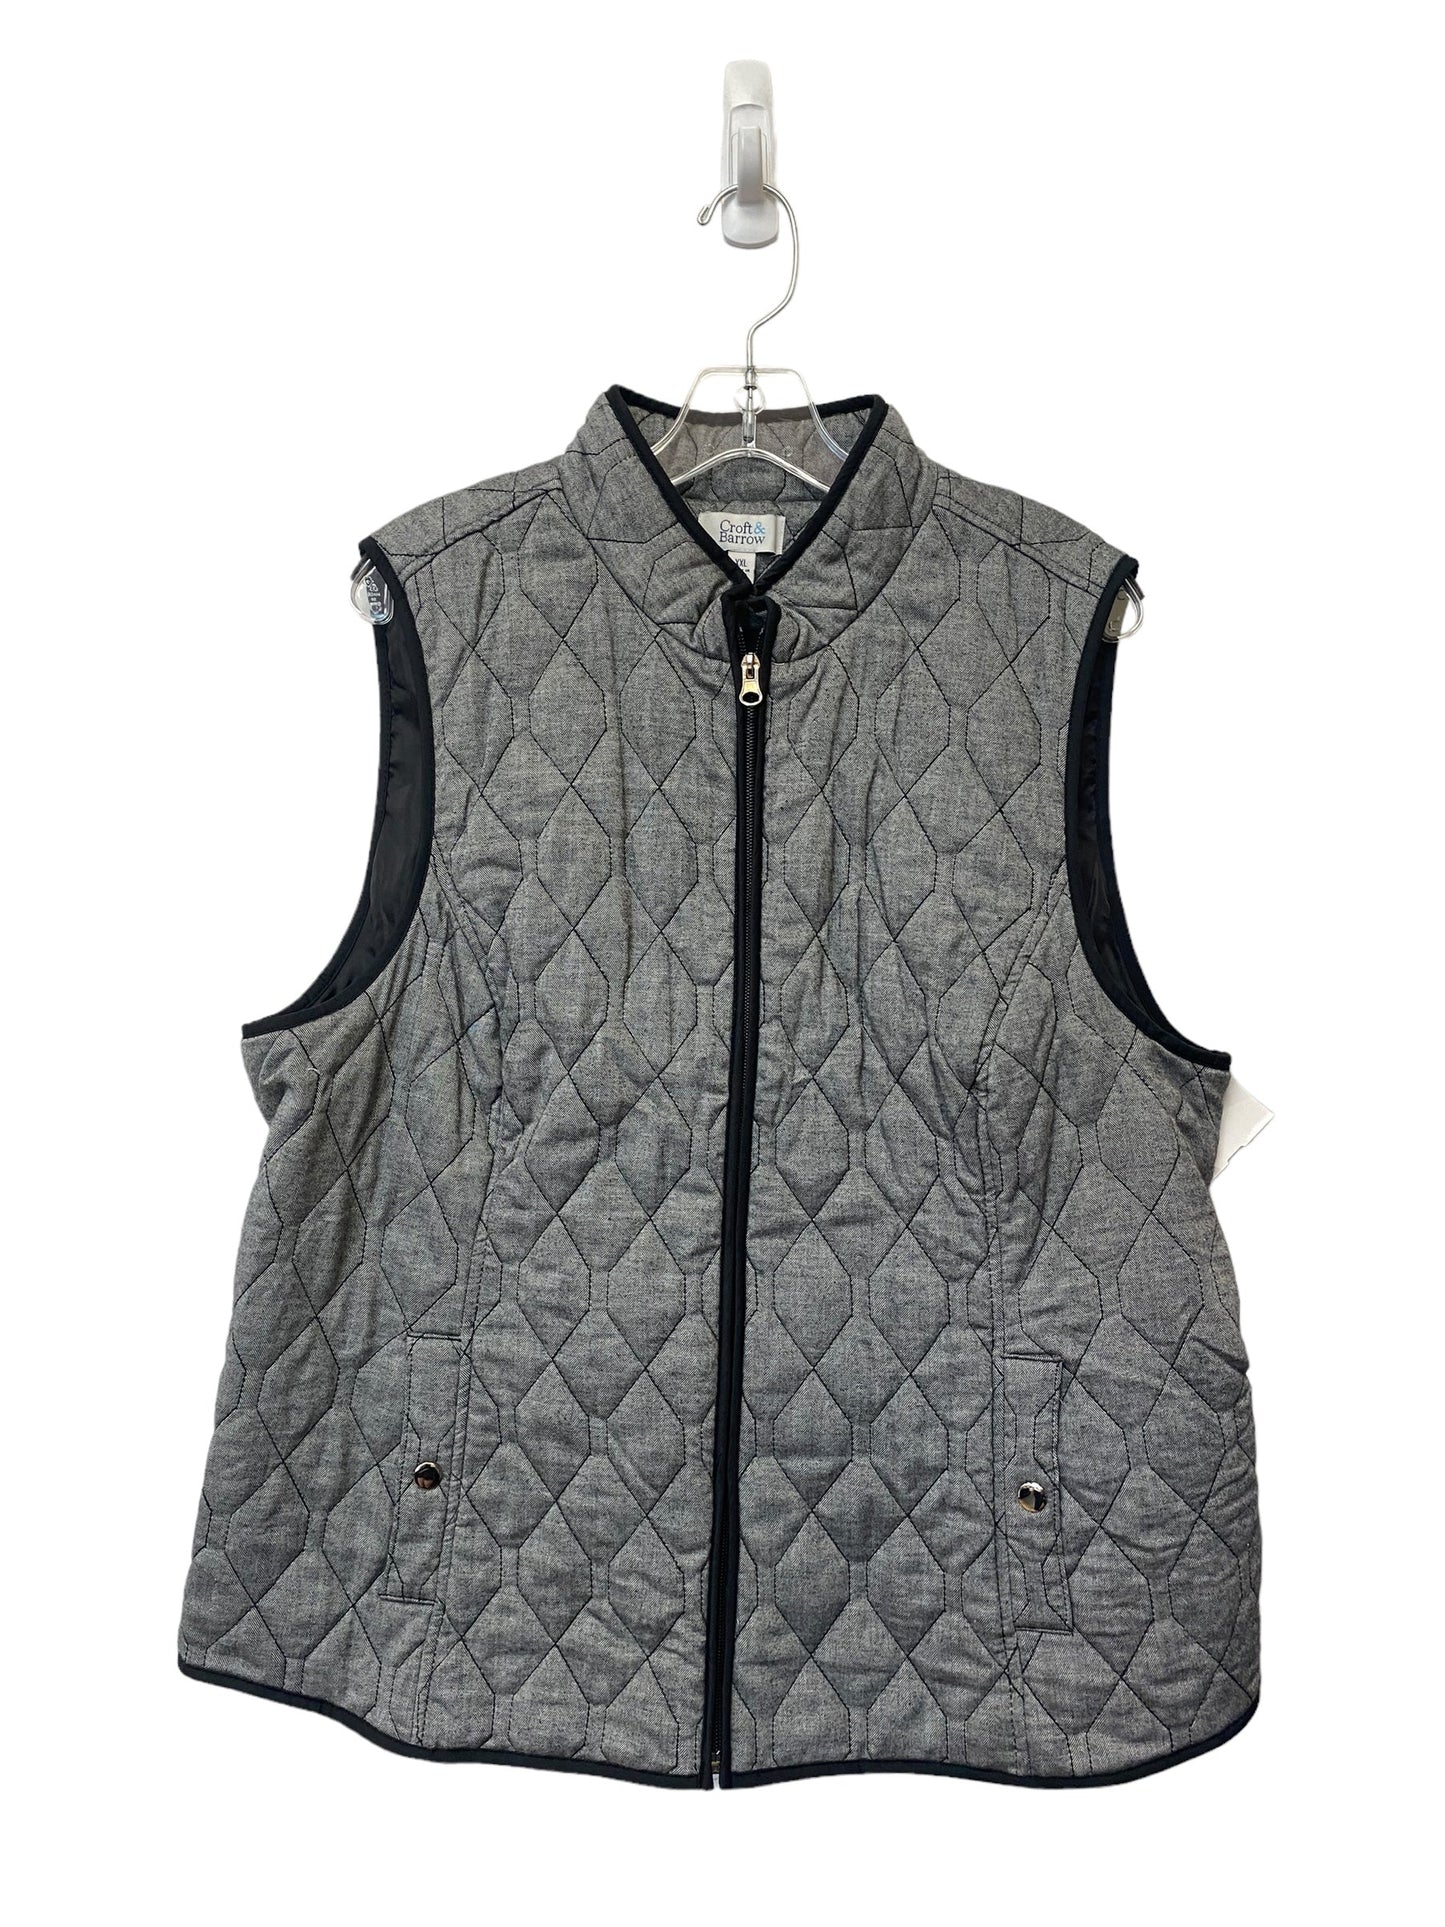 Grey Vest Other Croft And Barrow, Size 2x